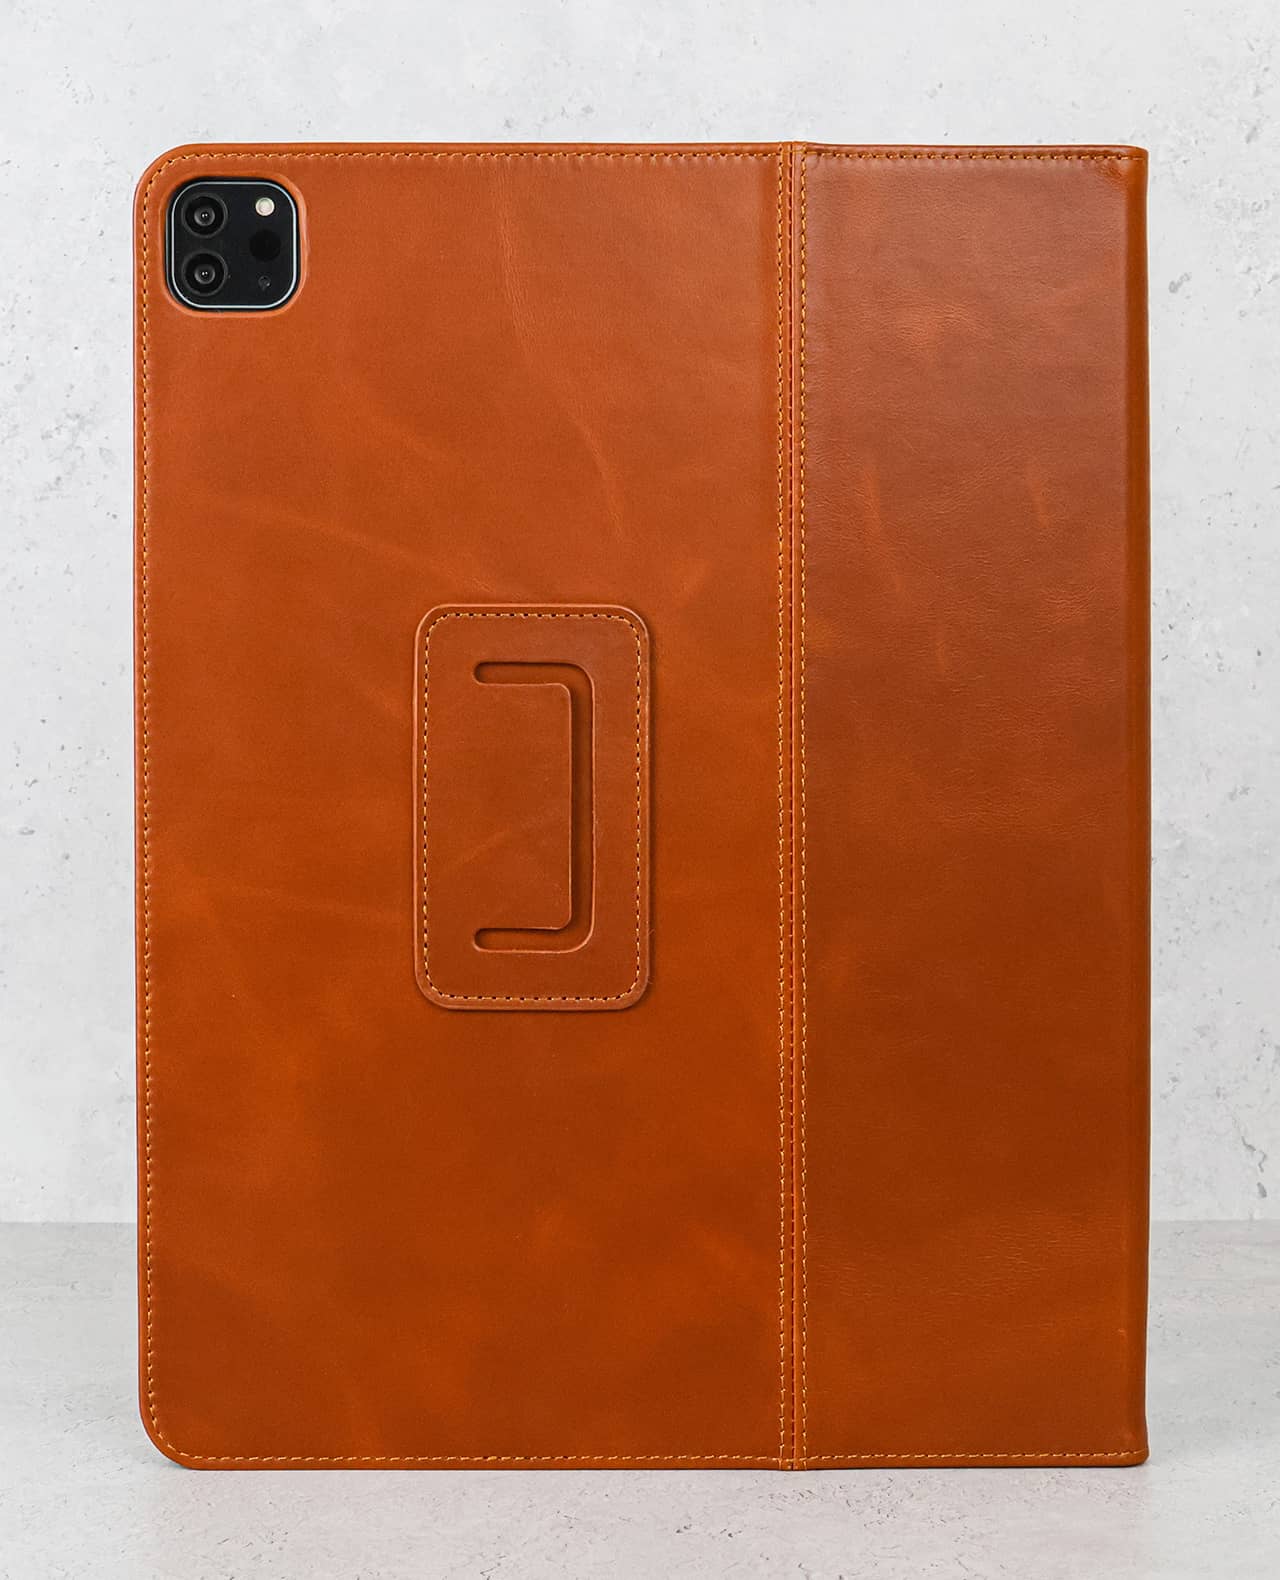 USA 12.9 Best Casemade Leather Case - Pro iPad Selling